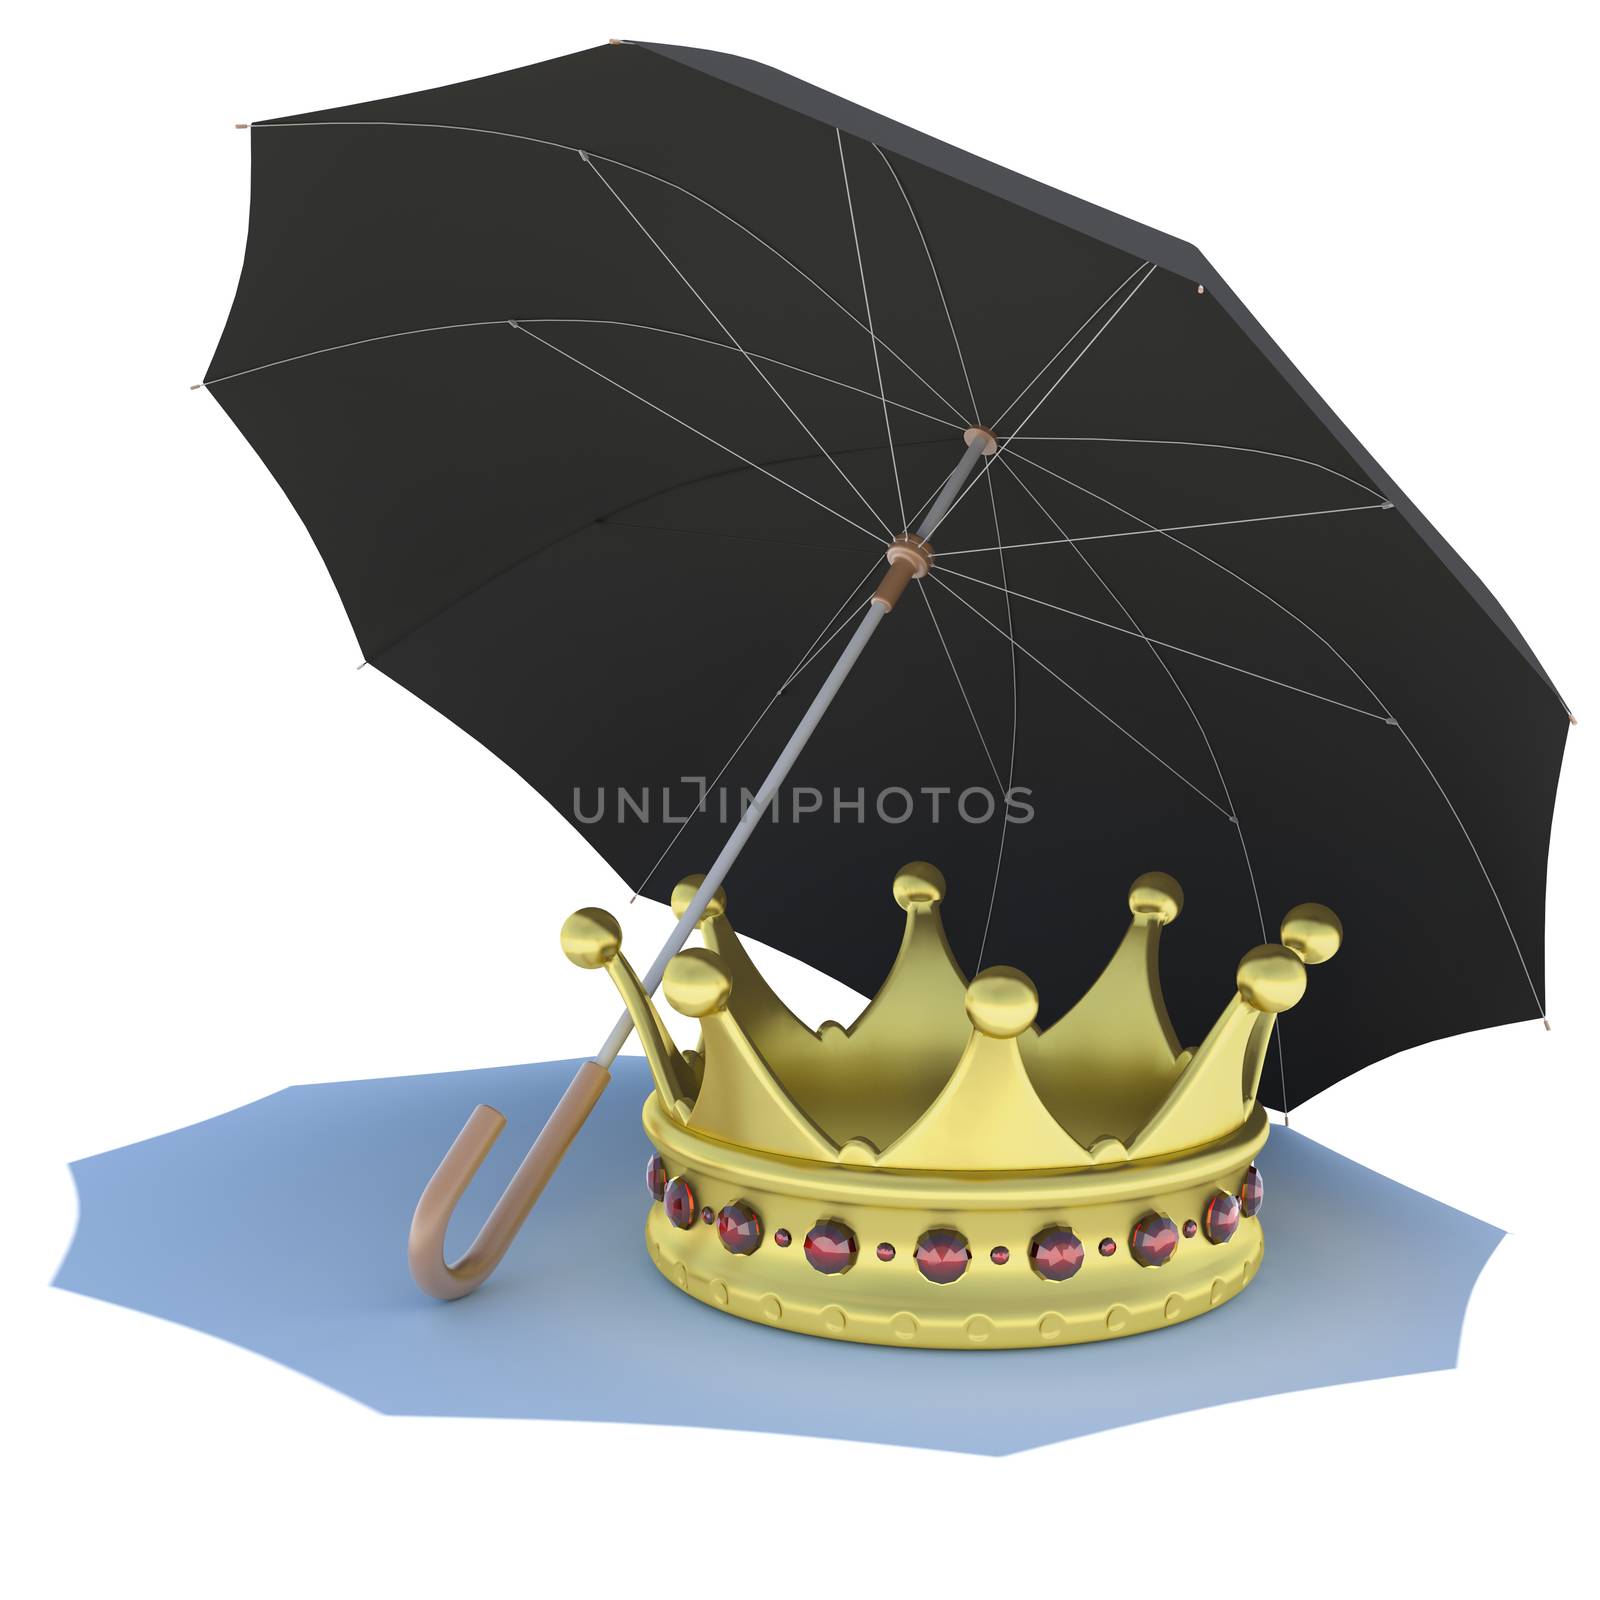 Umbrella covers the gold crown by cherezoff